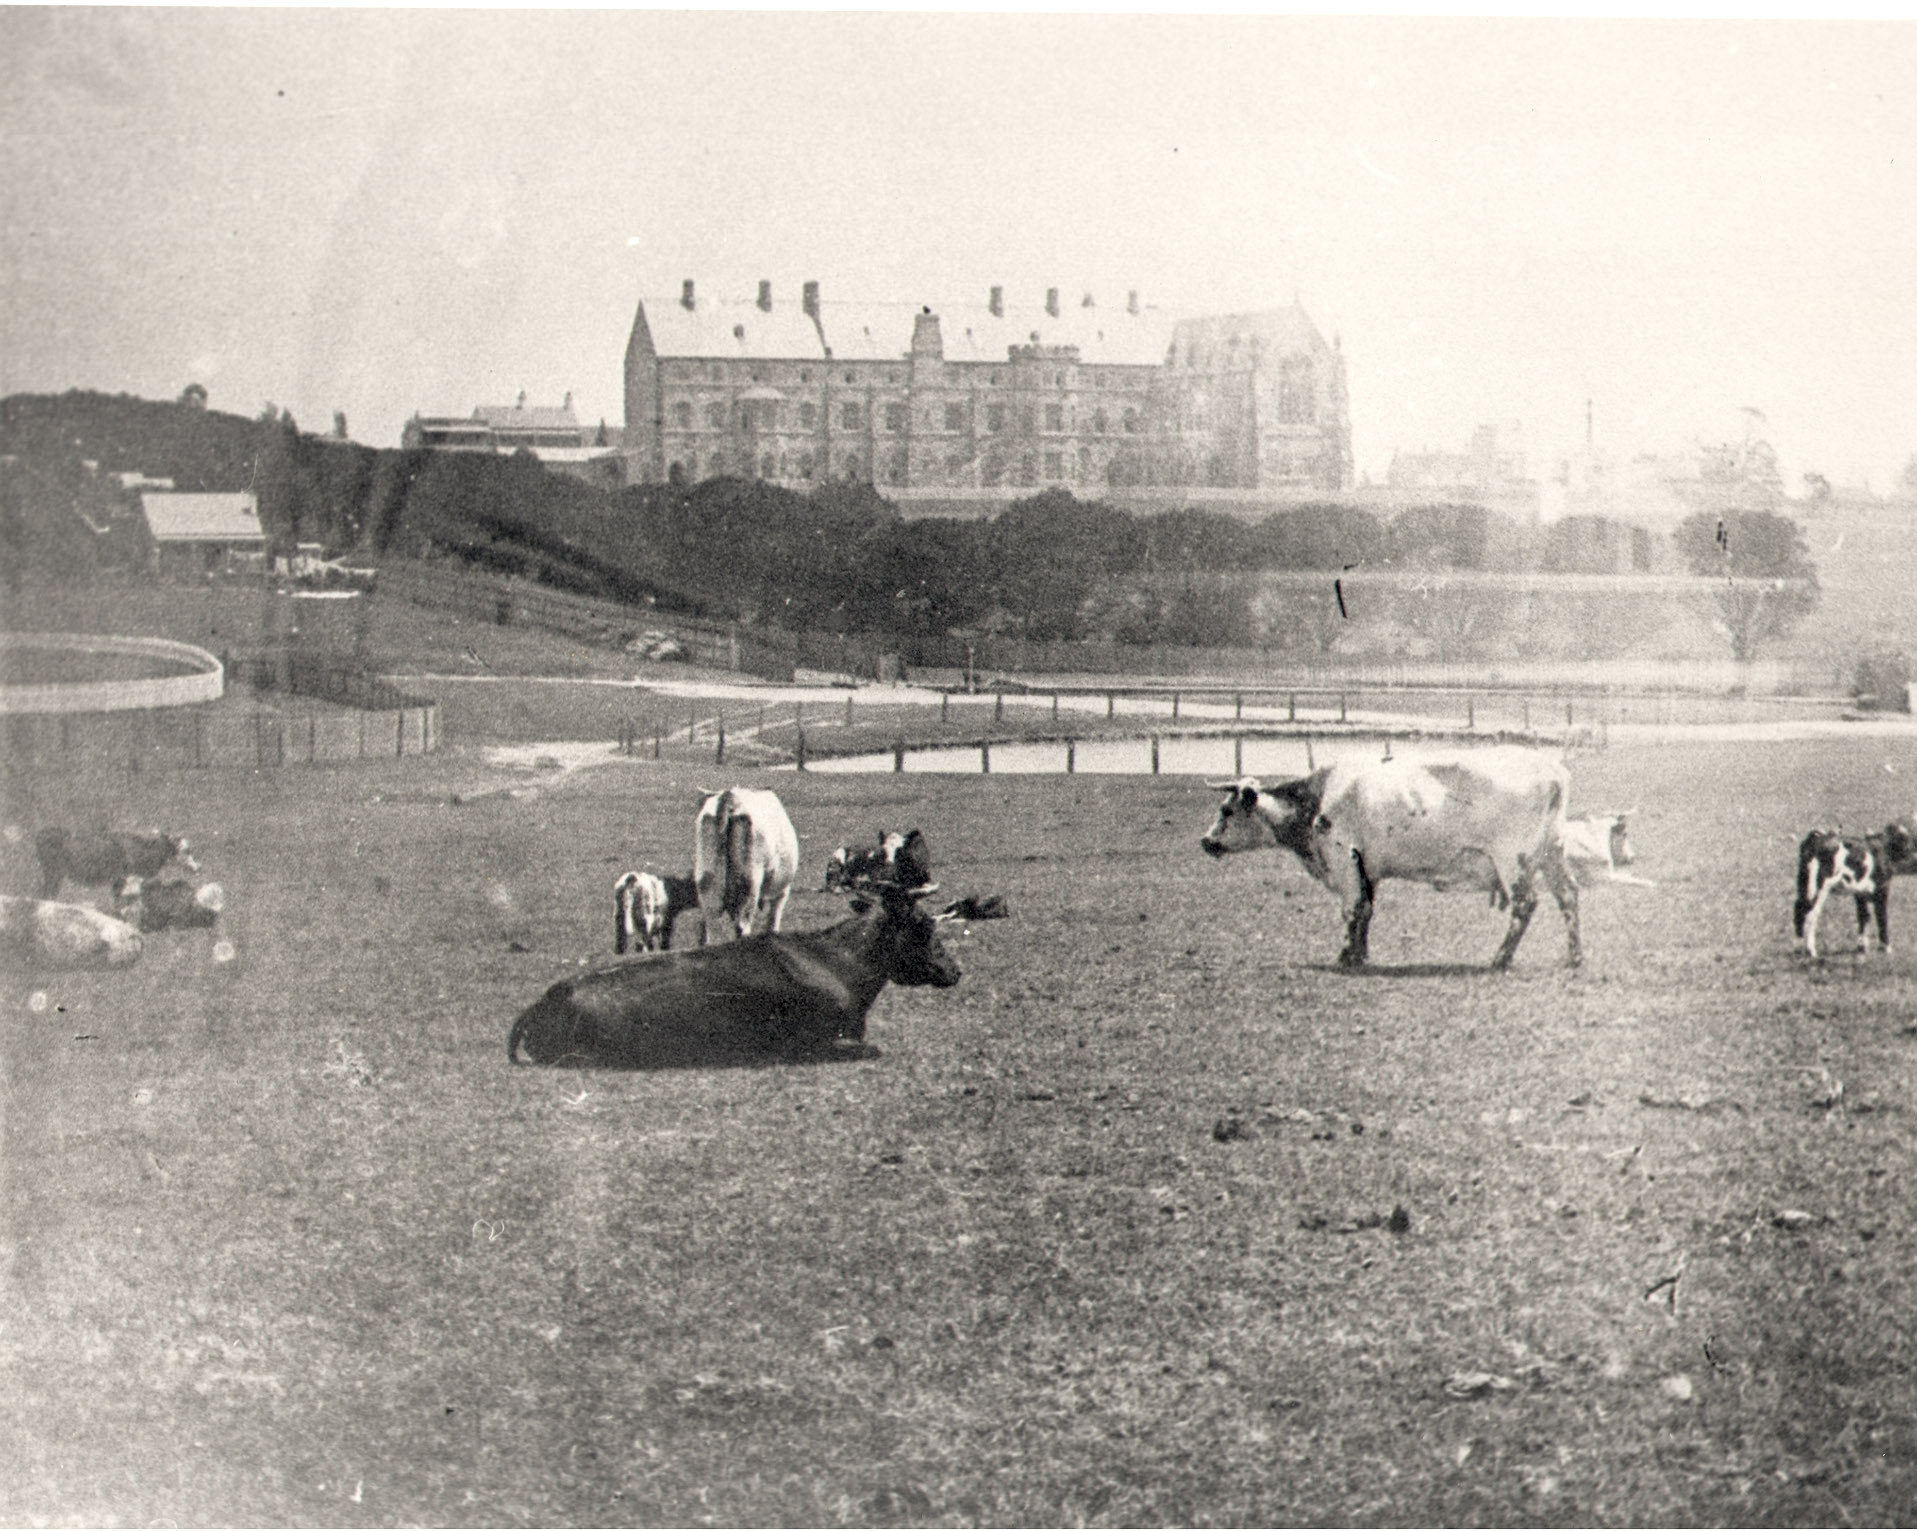 VIEW OF ST. JOHN'S COLLEGE AND GROUNDS WITH COWS IN FOREGROUND